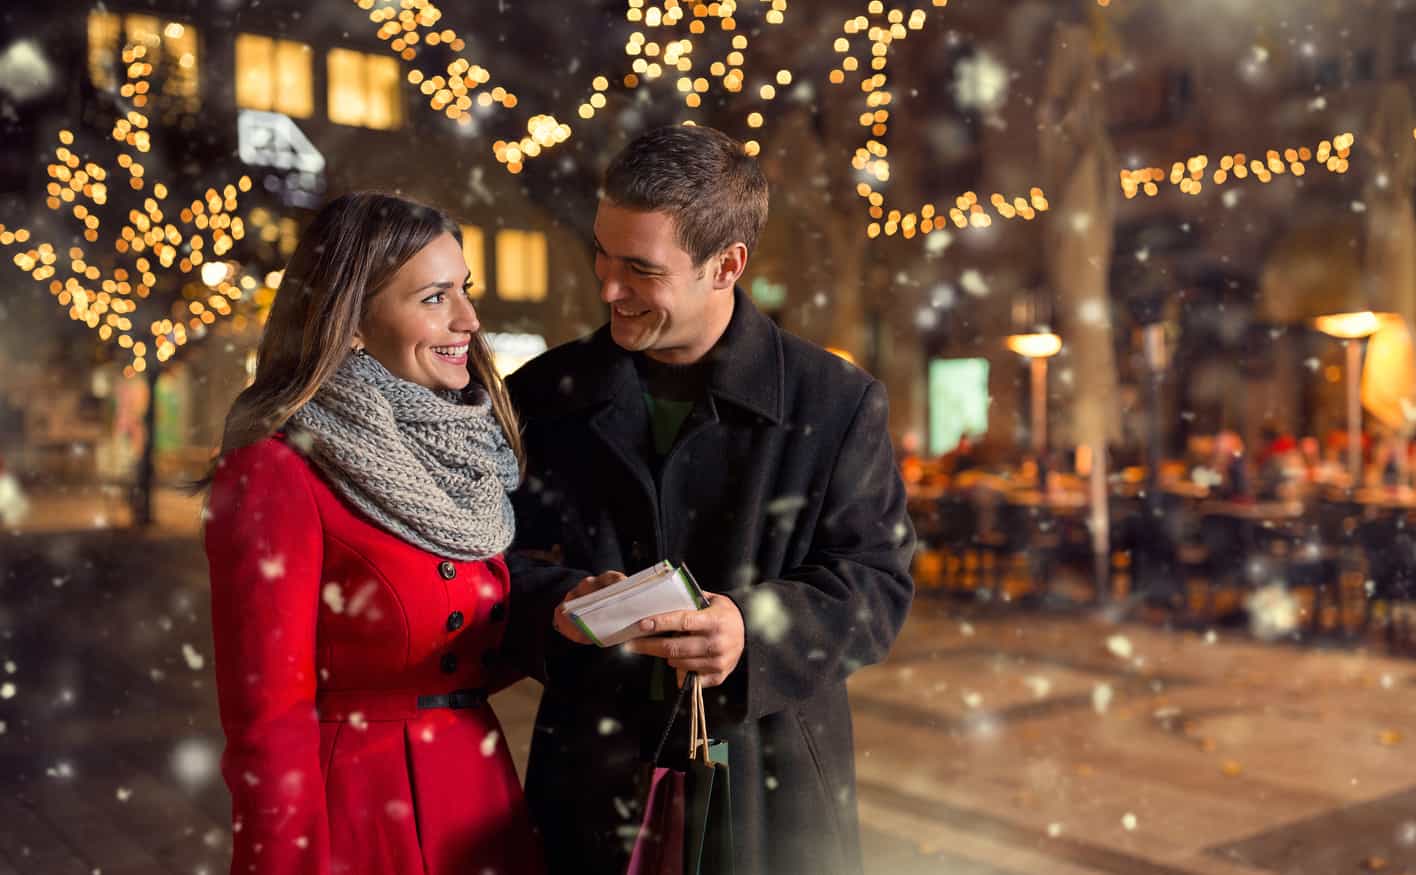 Manage Your Holiday Expenses With These 5 Smart Tips